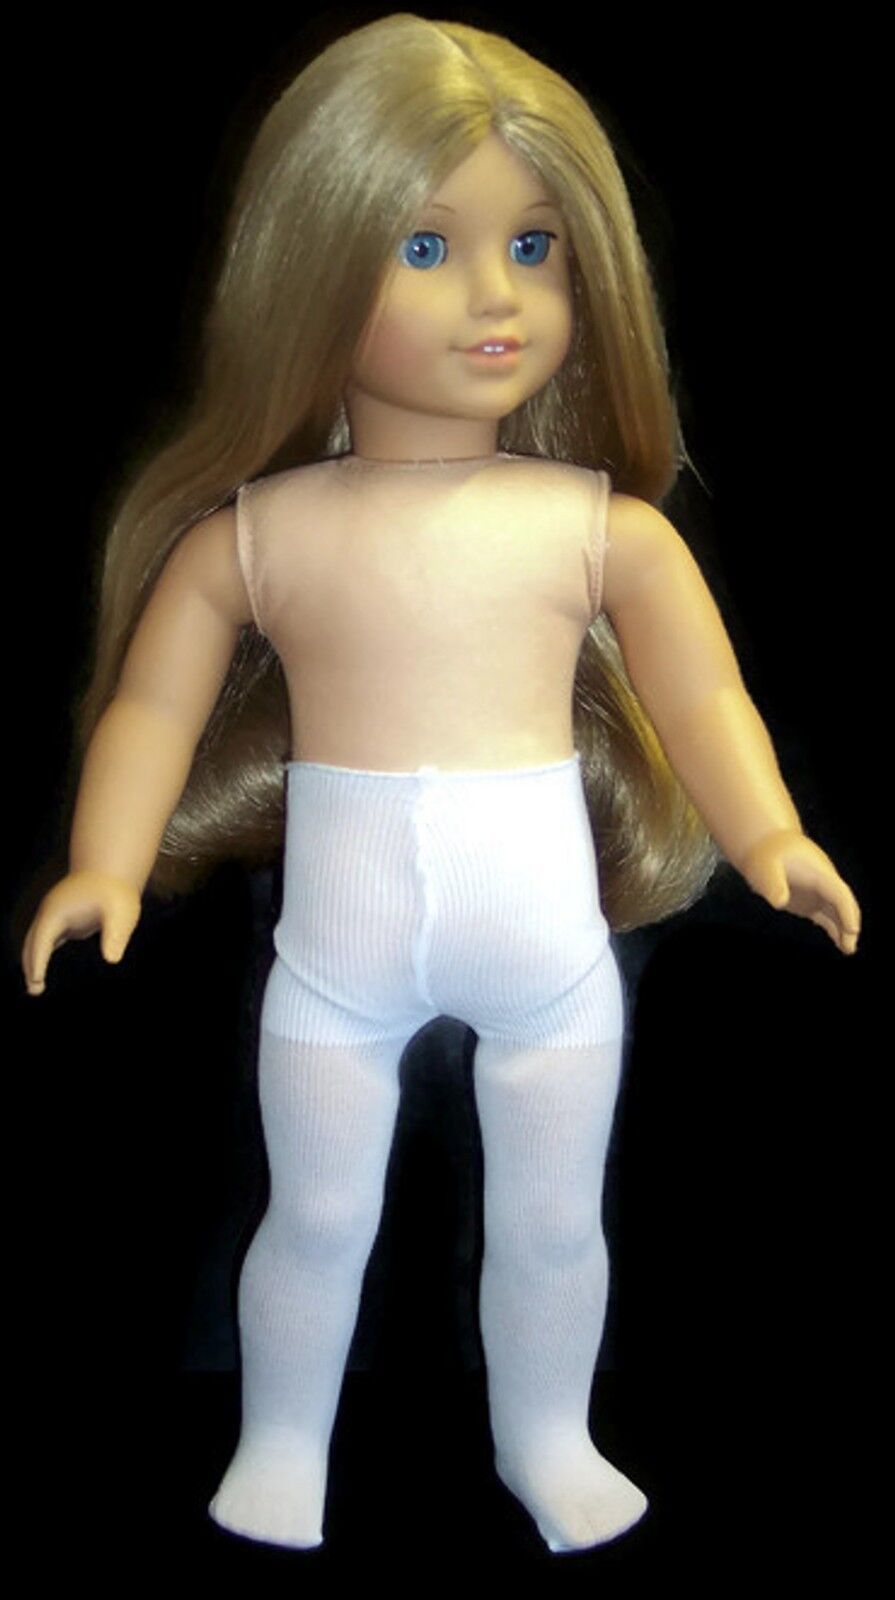 White Tights made for 18" American Girl Doll Clothes Accessories Dori's Doll Boutique 171w